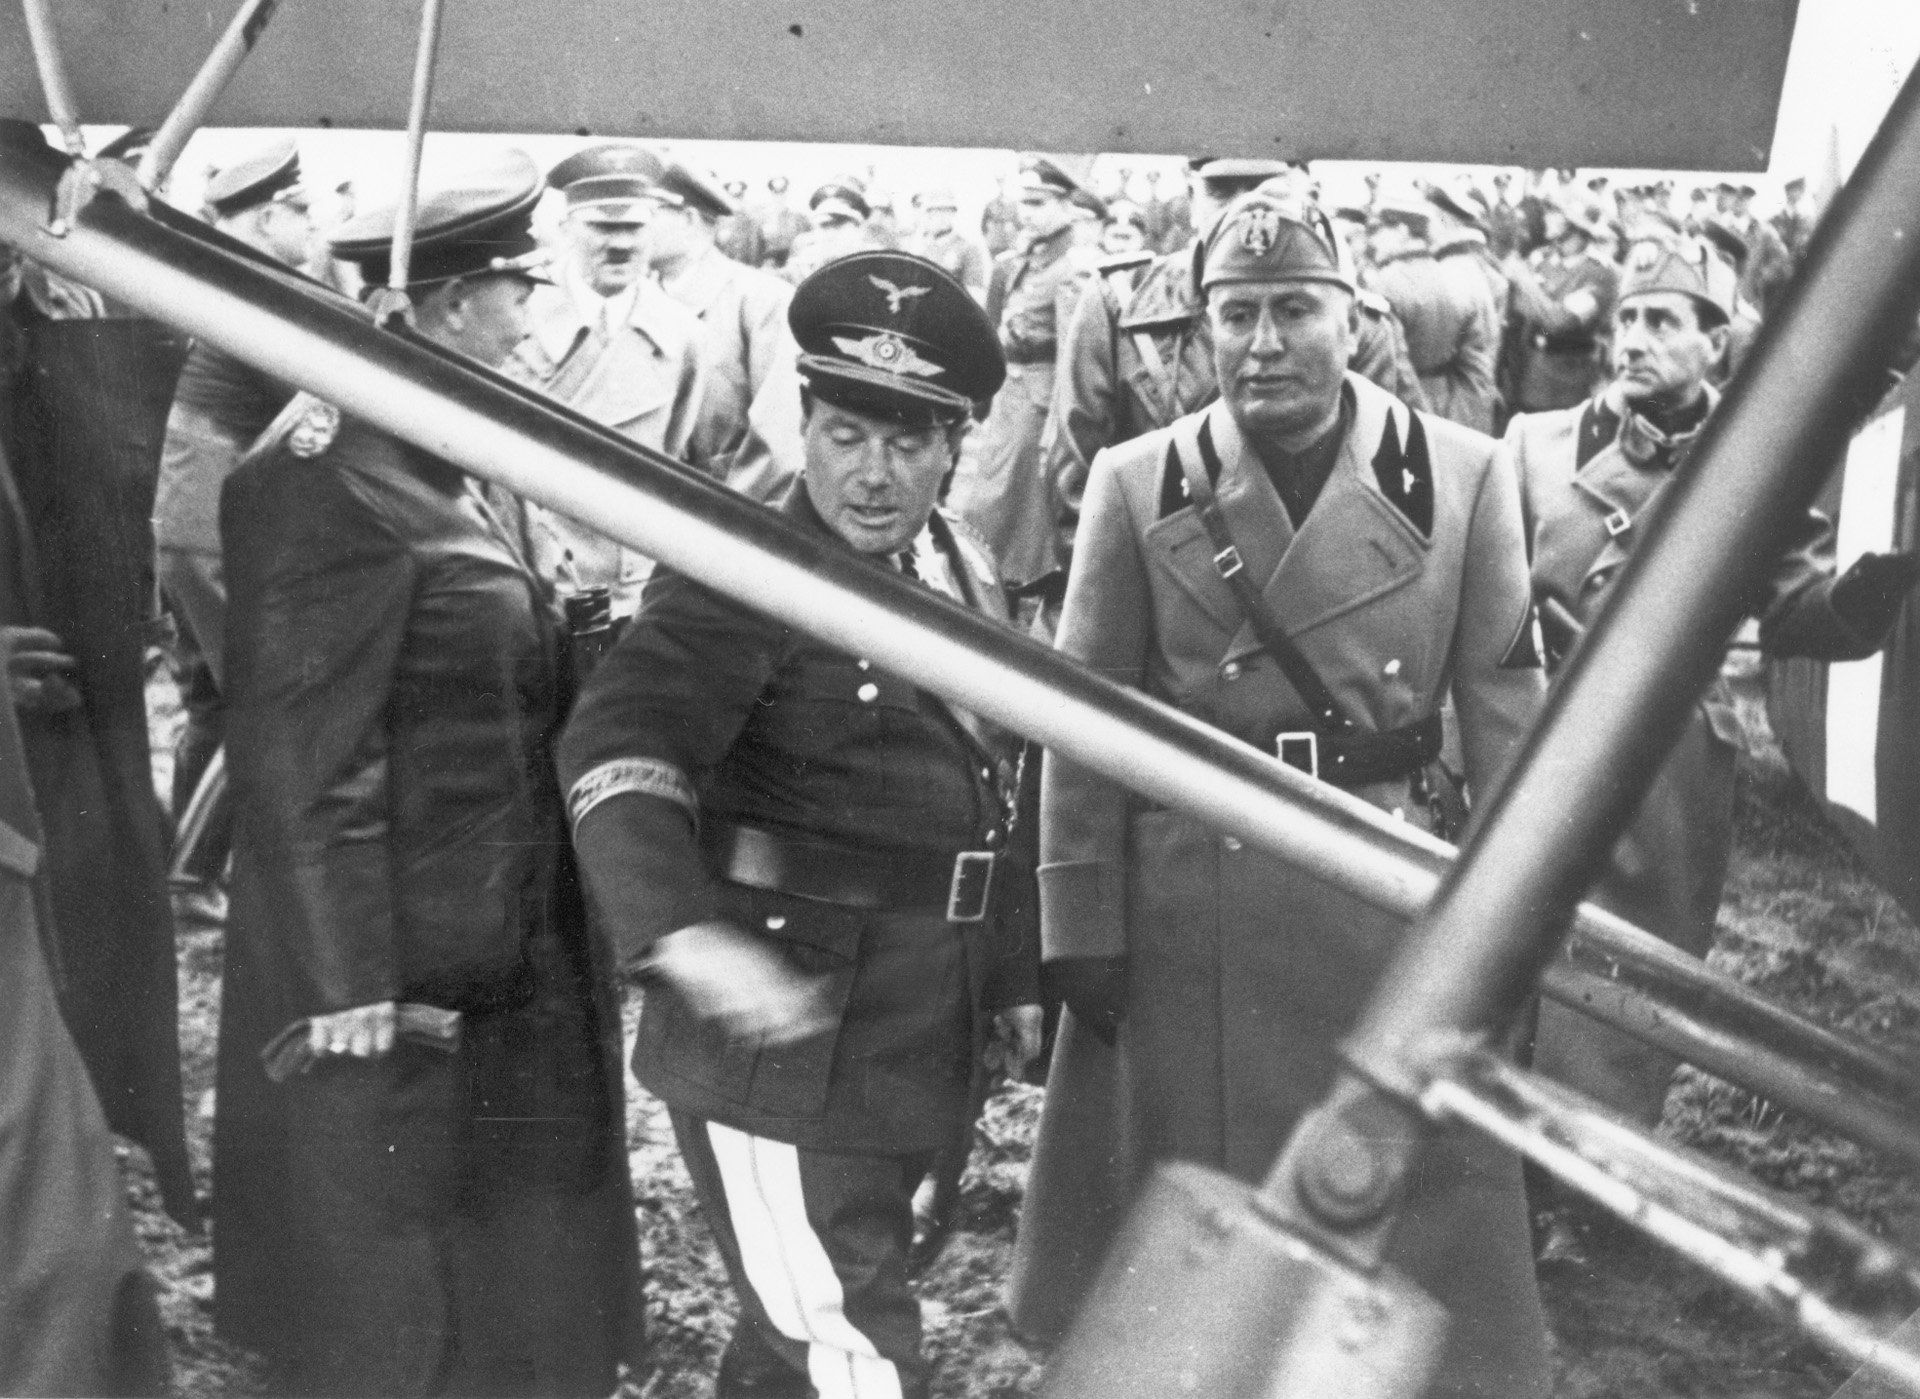 Luftwaffe General Ernst Udet describes features of the Storch to Mussolini while a crowd, which includes Hitler (background), looks on, September 1939.